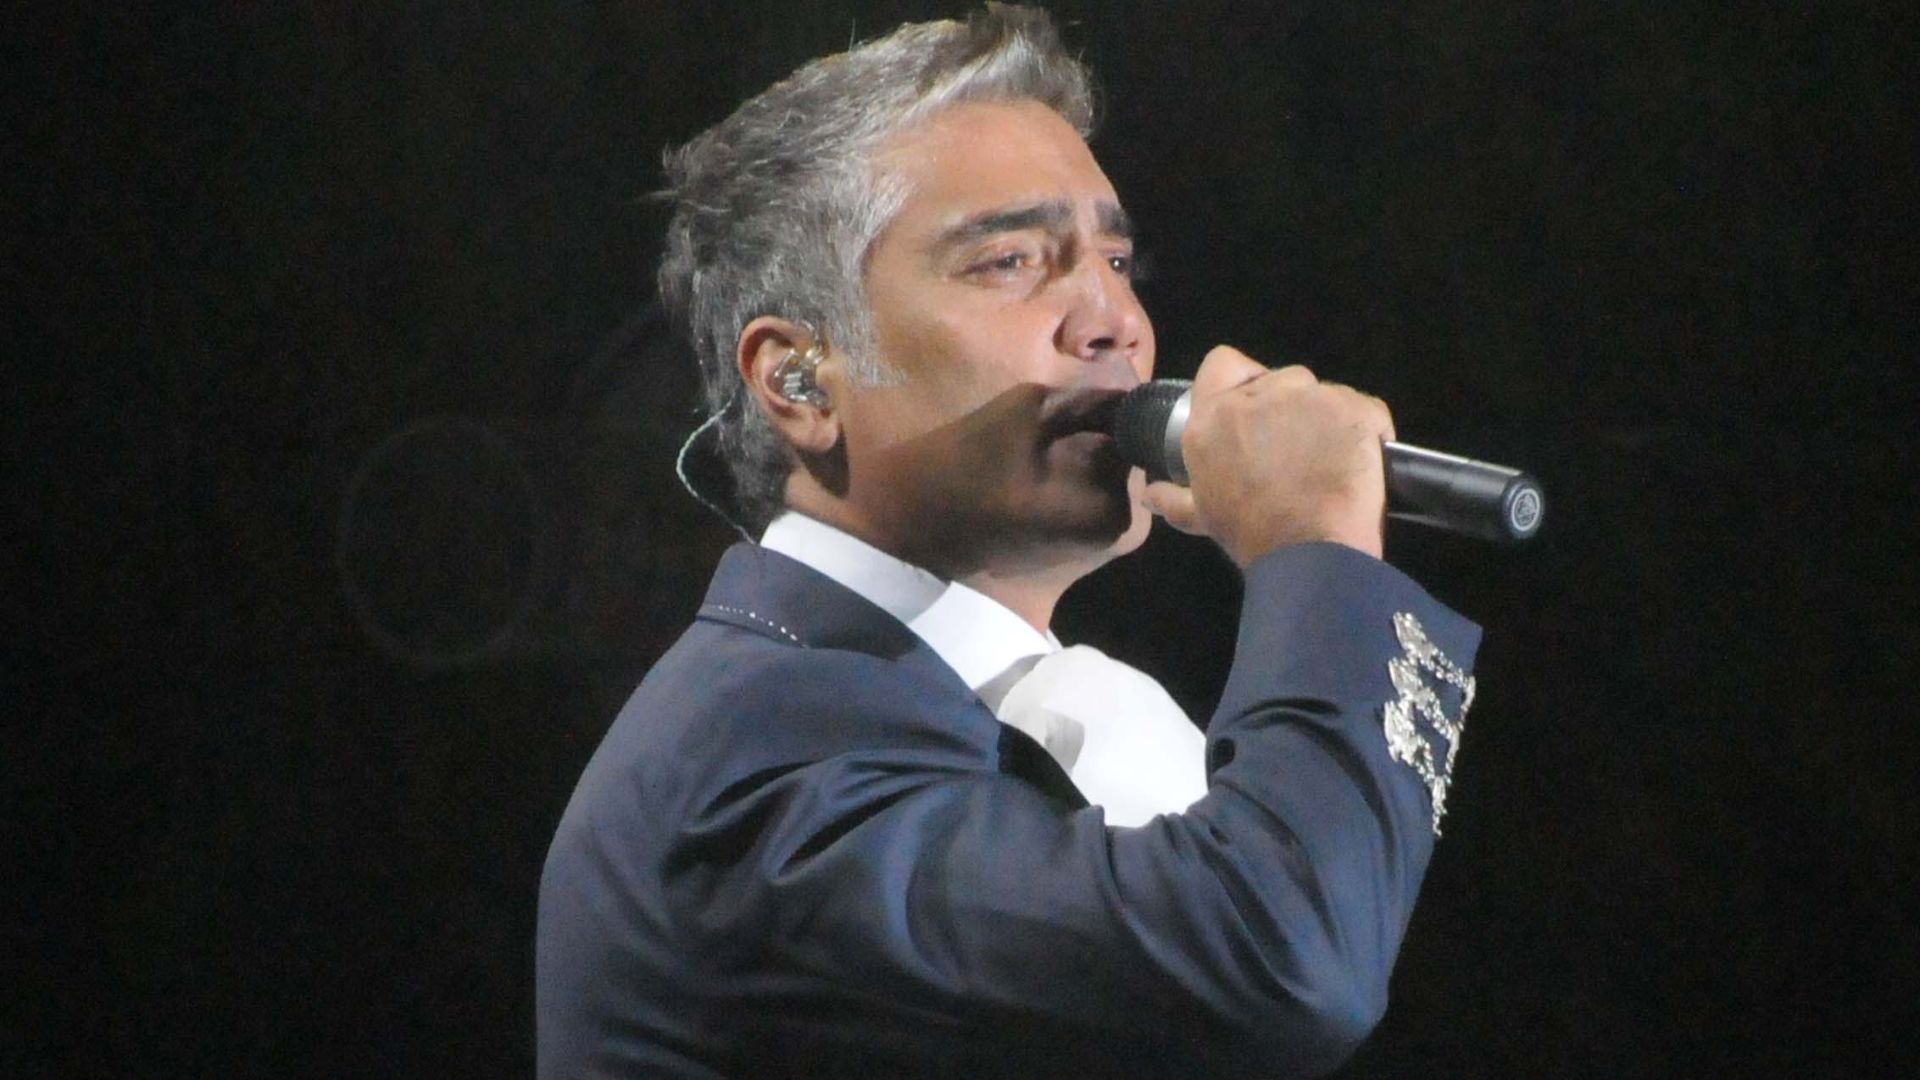 Alejandro Fernandez was Criticized for His Appearance in a Recent Concert While He Seemingly Continues to Grief the Death of His Father, Vicente Fernandez